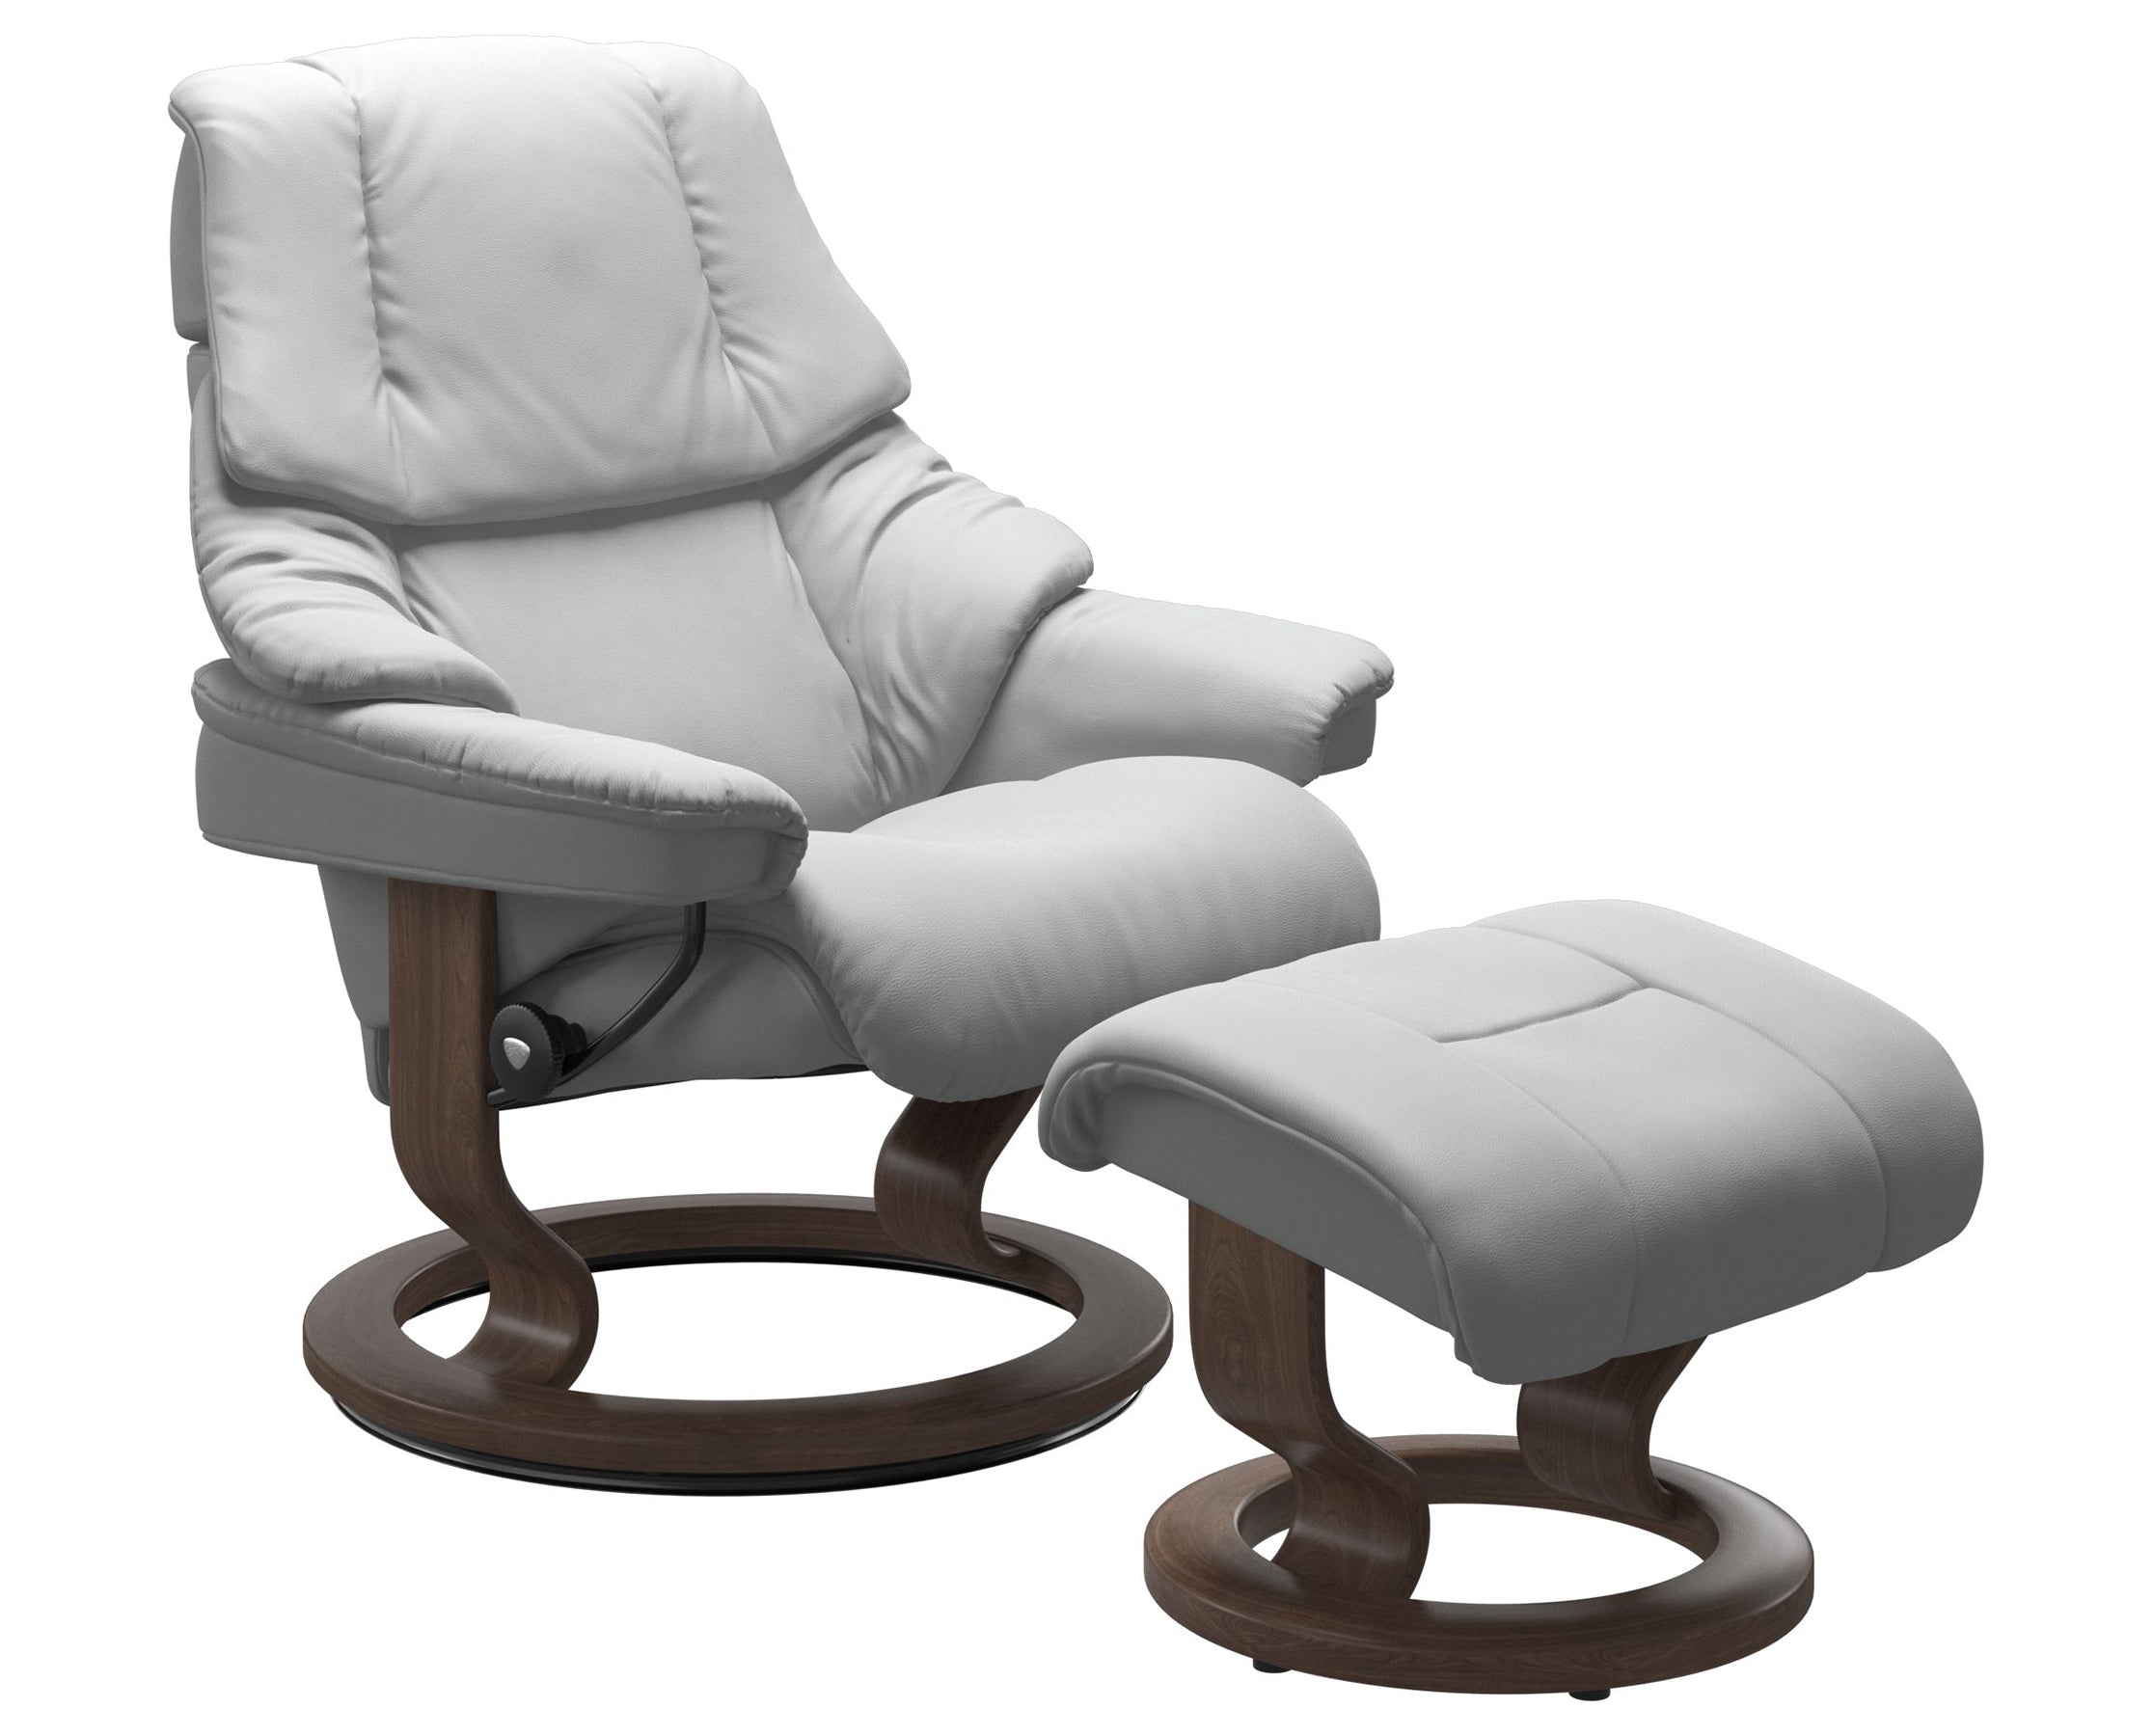 Paloma Leather Misty Grey S/M/L and Walnut Base | Stressless Reno Classic Recliner | Valley Ridge Furniture